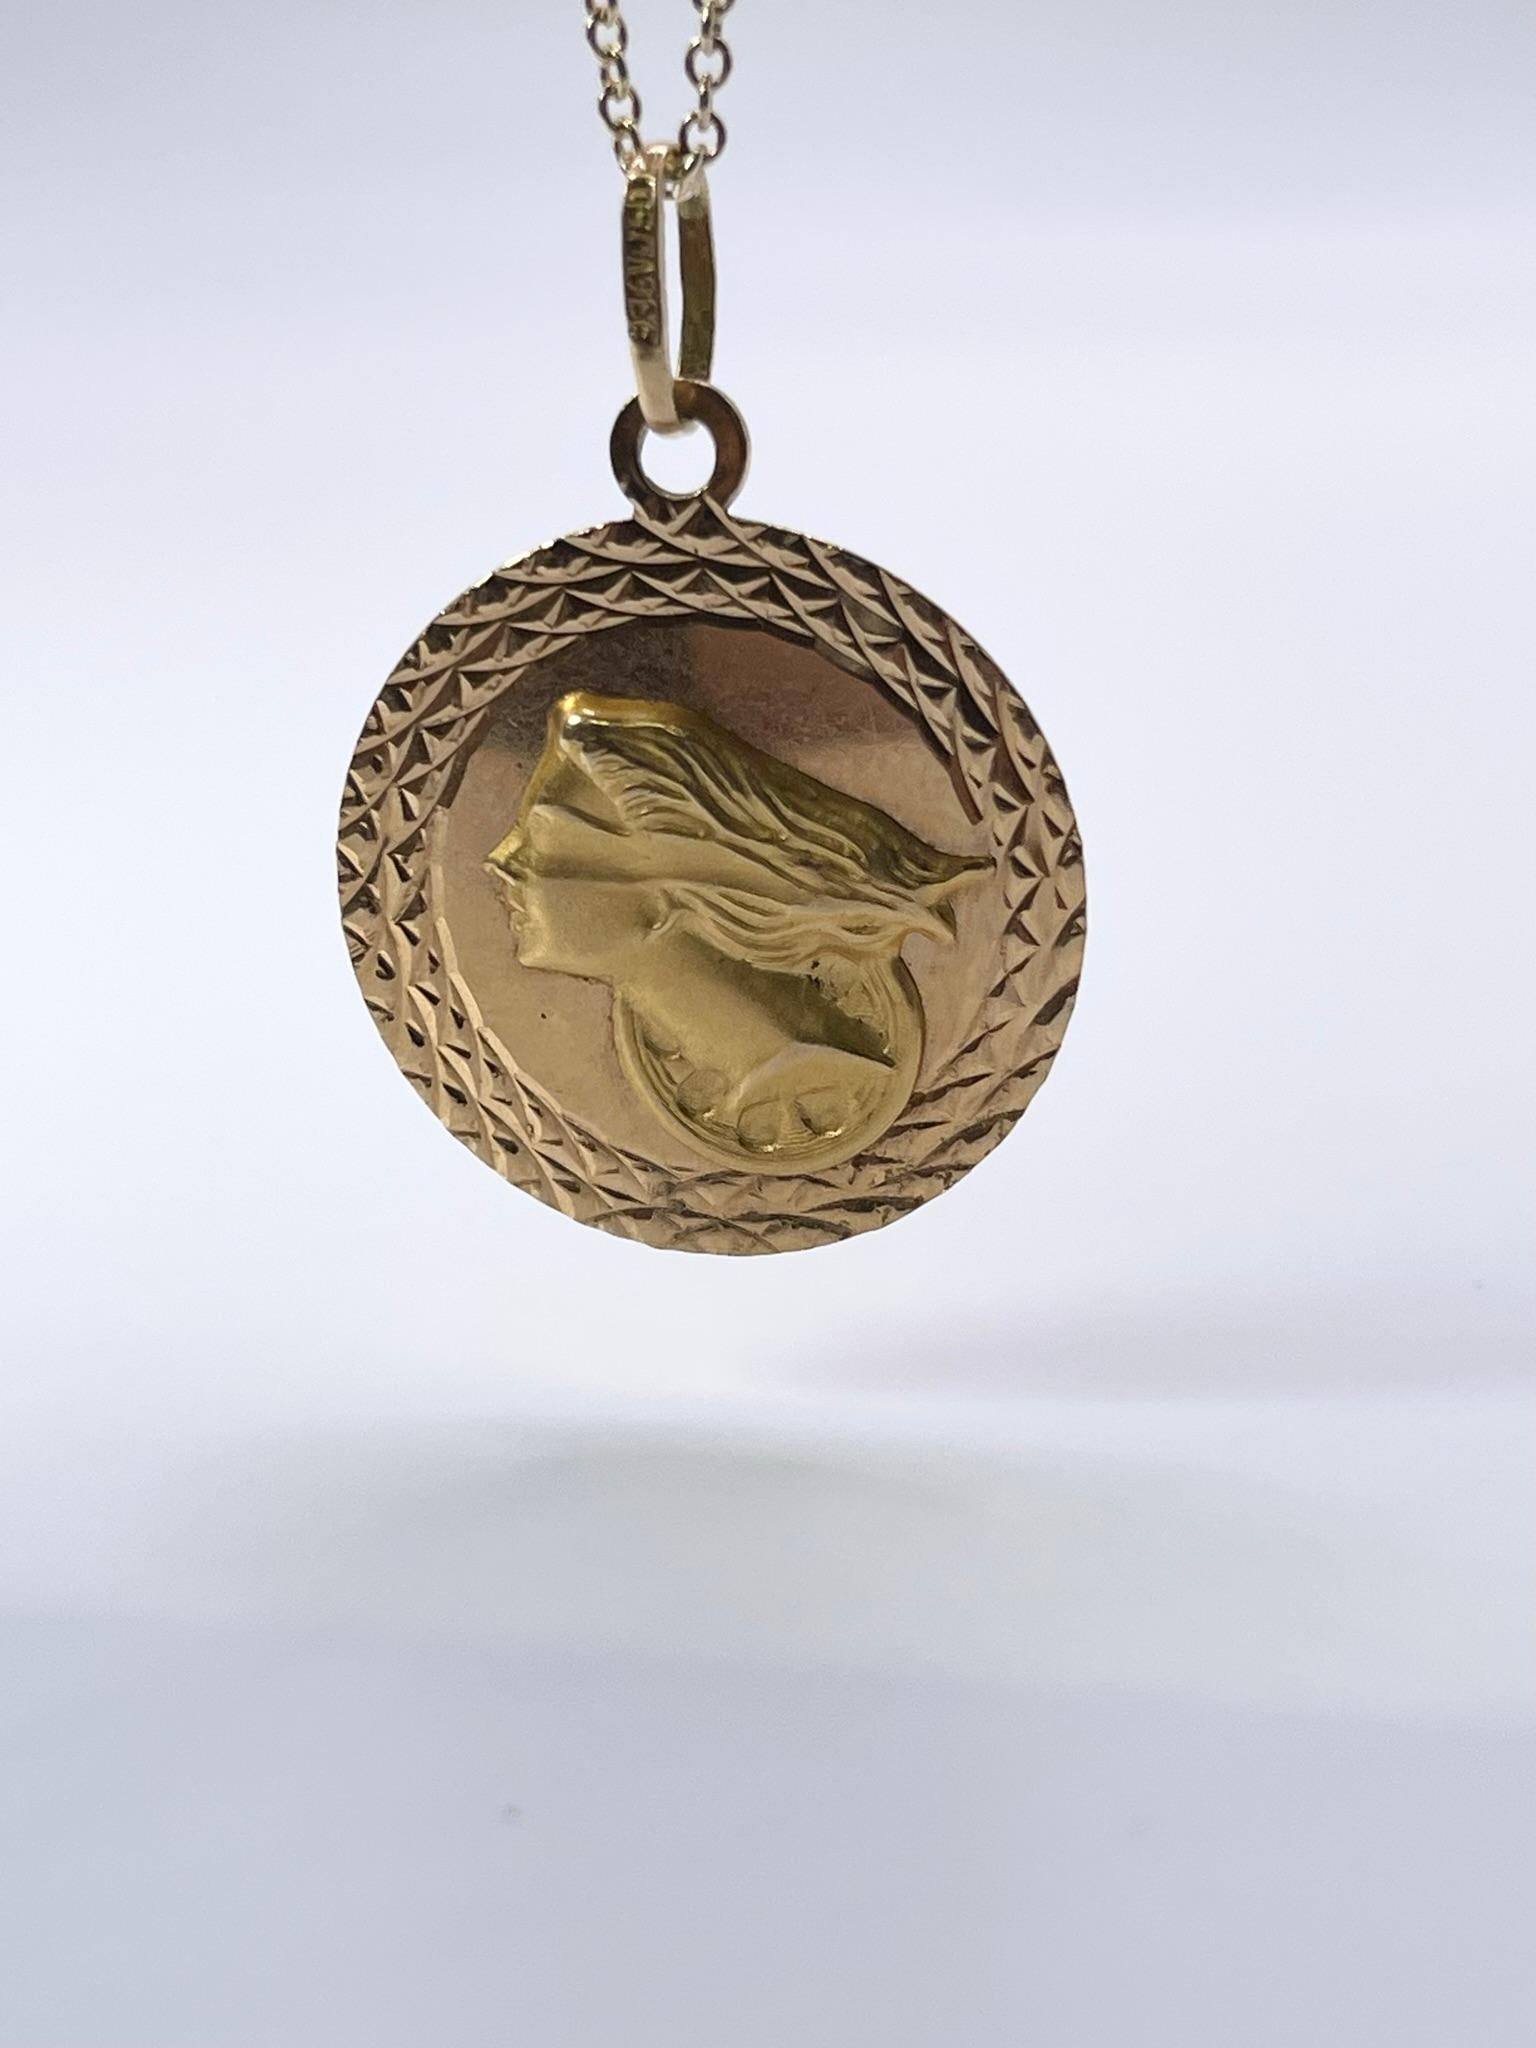 Lady head pendant necklace in 18KT yellow gold, 29mm x 14mm diameter of the pendant. Comes with chain!

GRAM WEIGHT: 5.57gr
GOLD: 18KT yellow gold


WHAT YOU GET AT STAMPAR JEWELERS:
Stampar Jewelers, located in the heart of Jupiter, Florida, is a